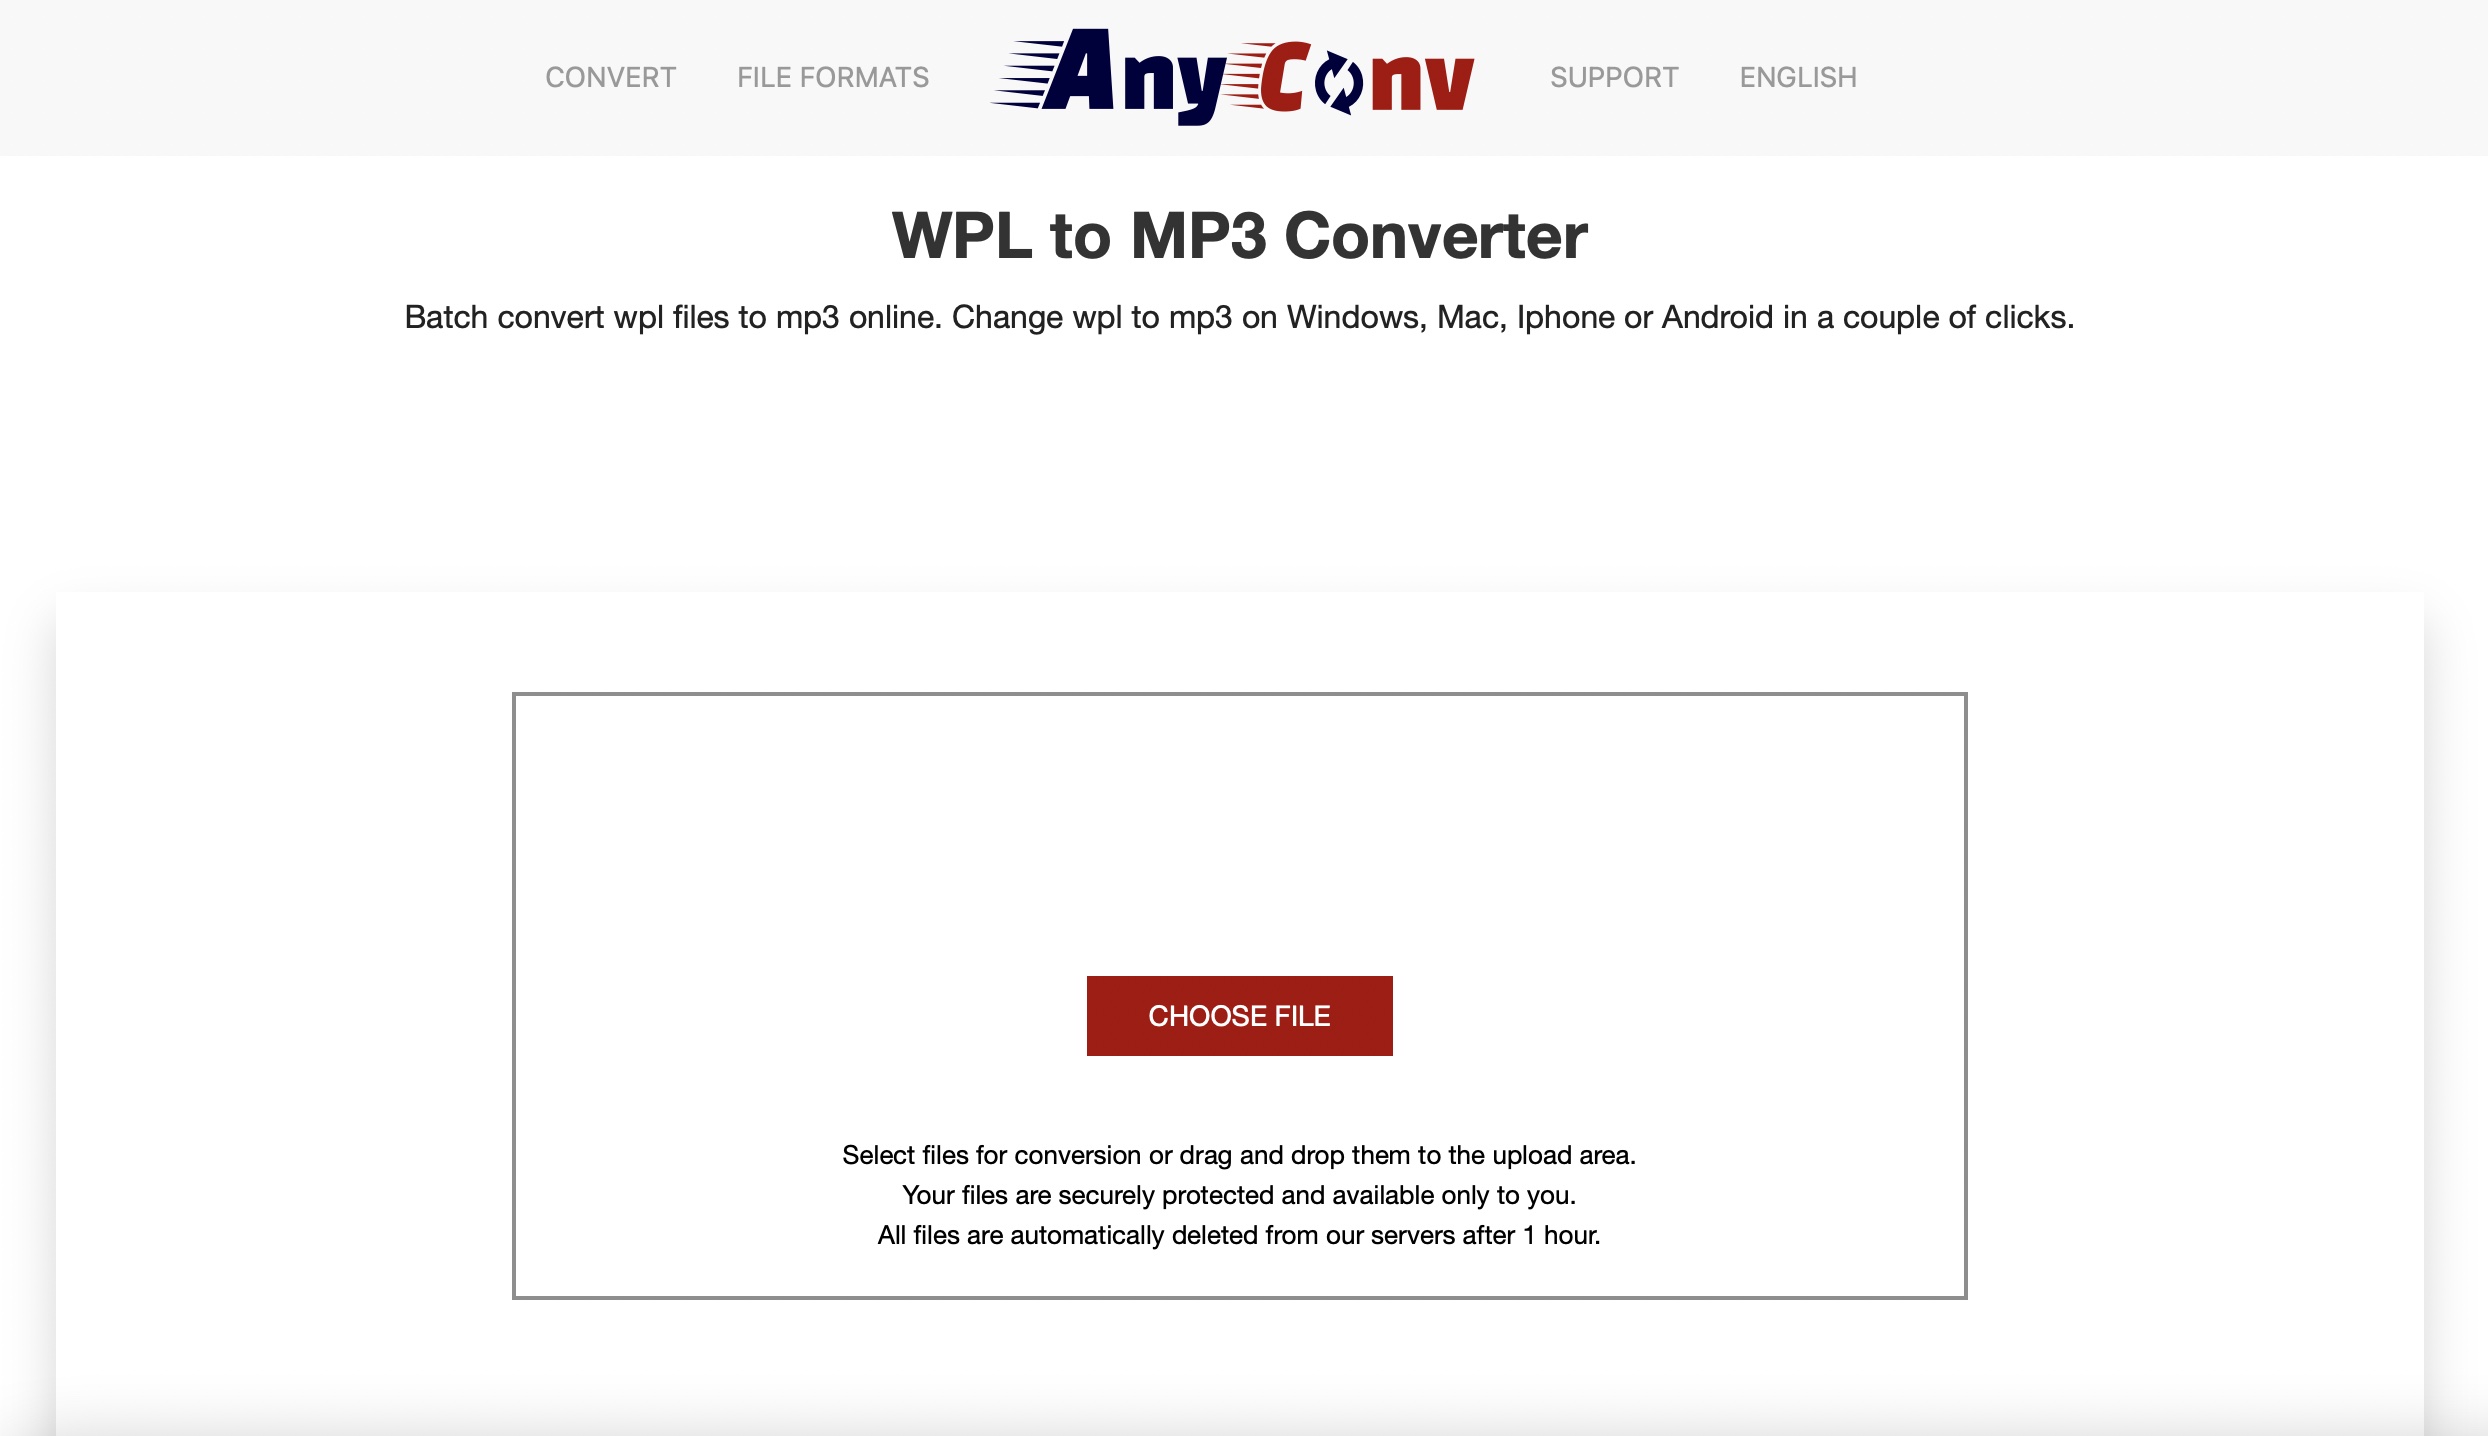 anyconv-wpl-to-mp3-converter